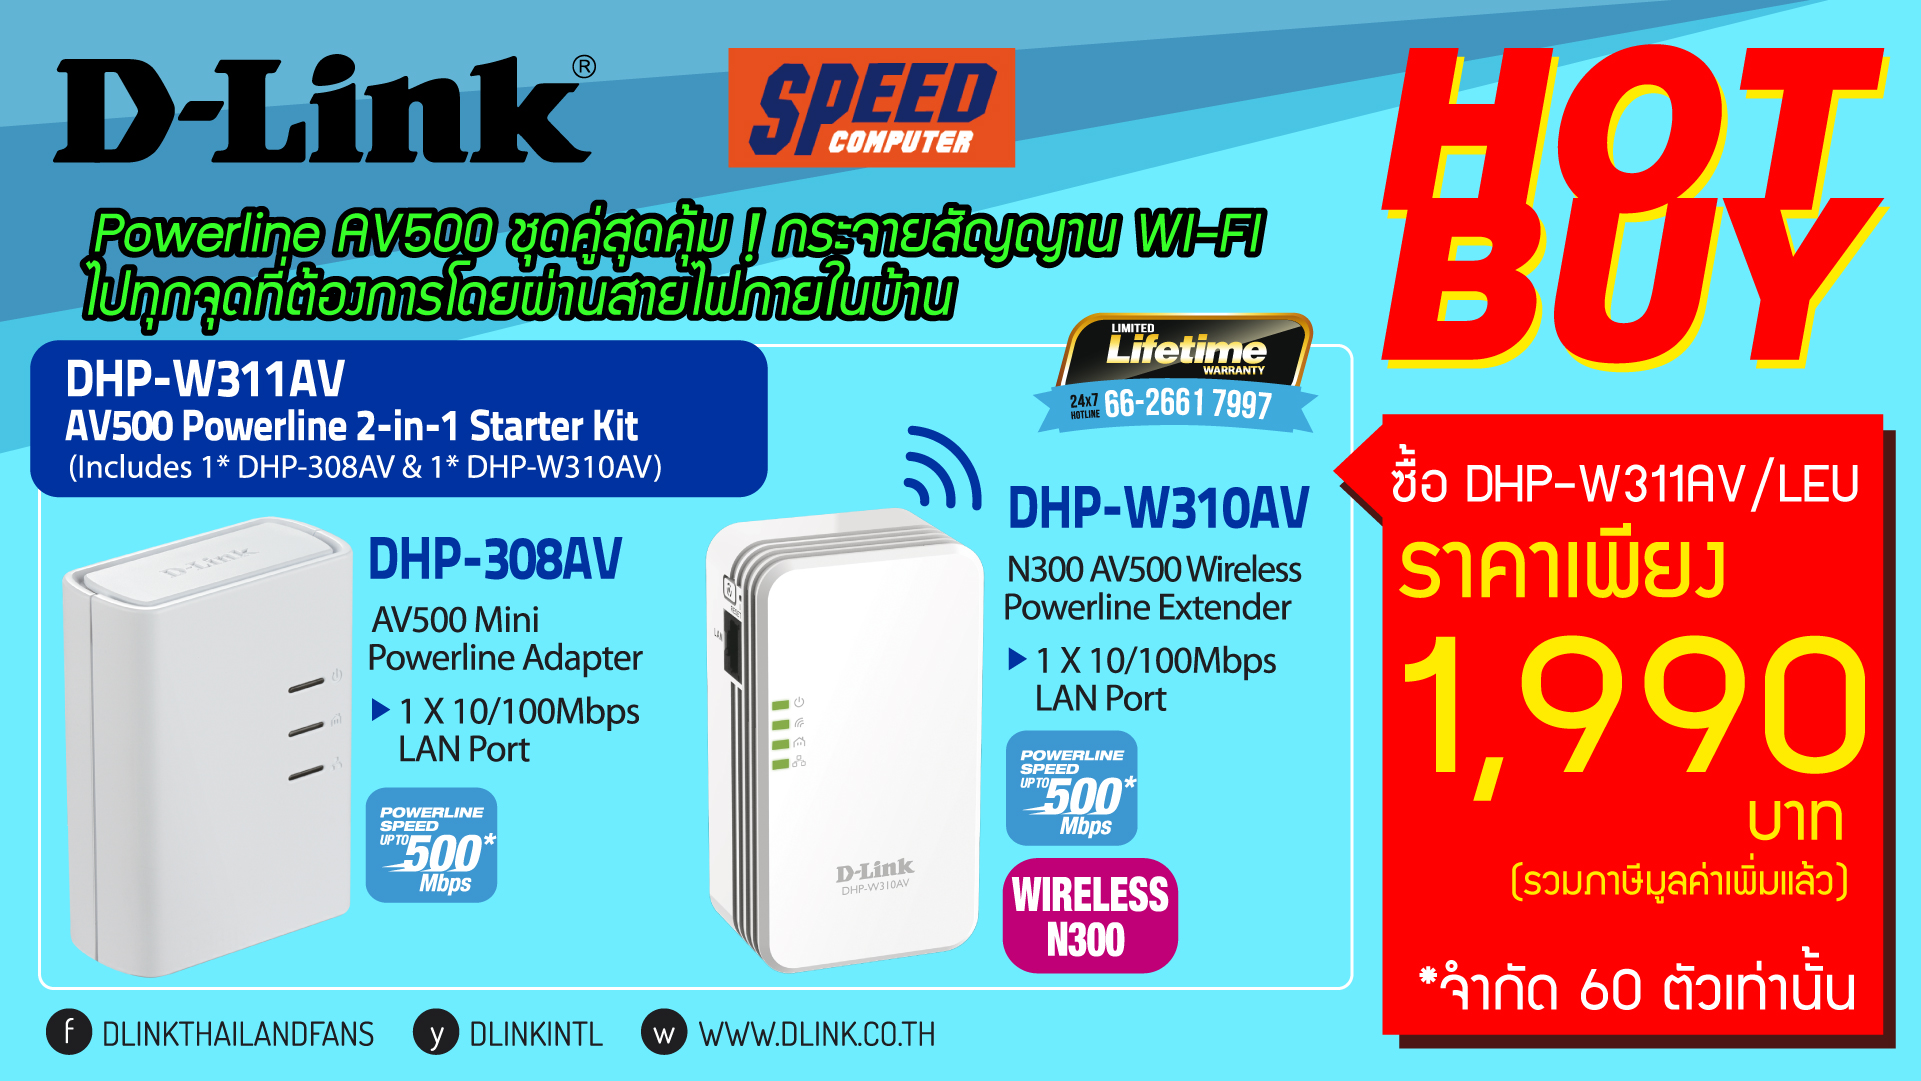 D-Link-Commart-Screen-for-Speed-March-16-03